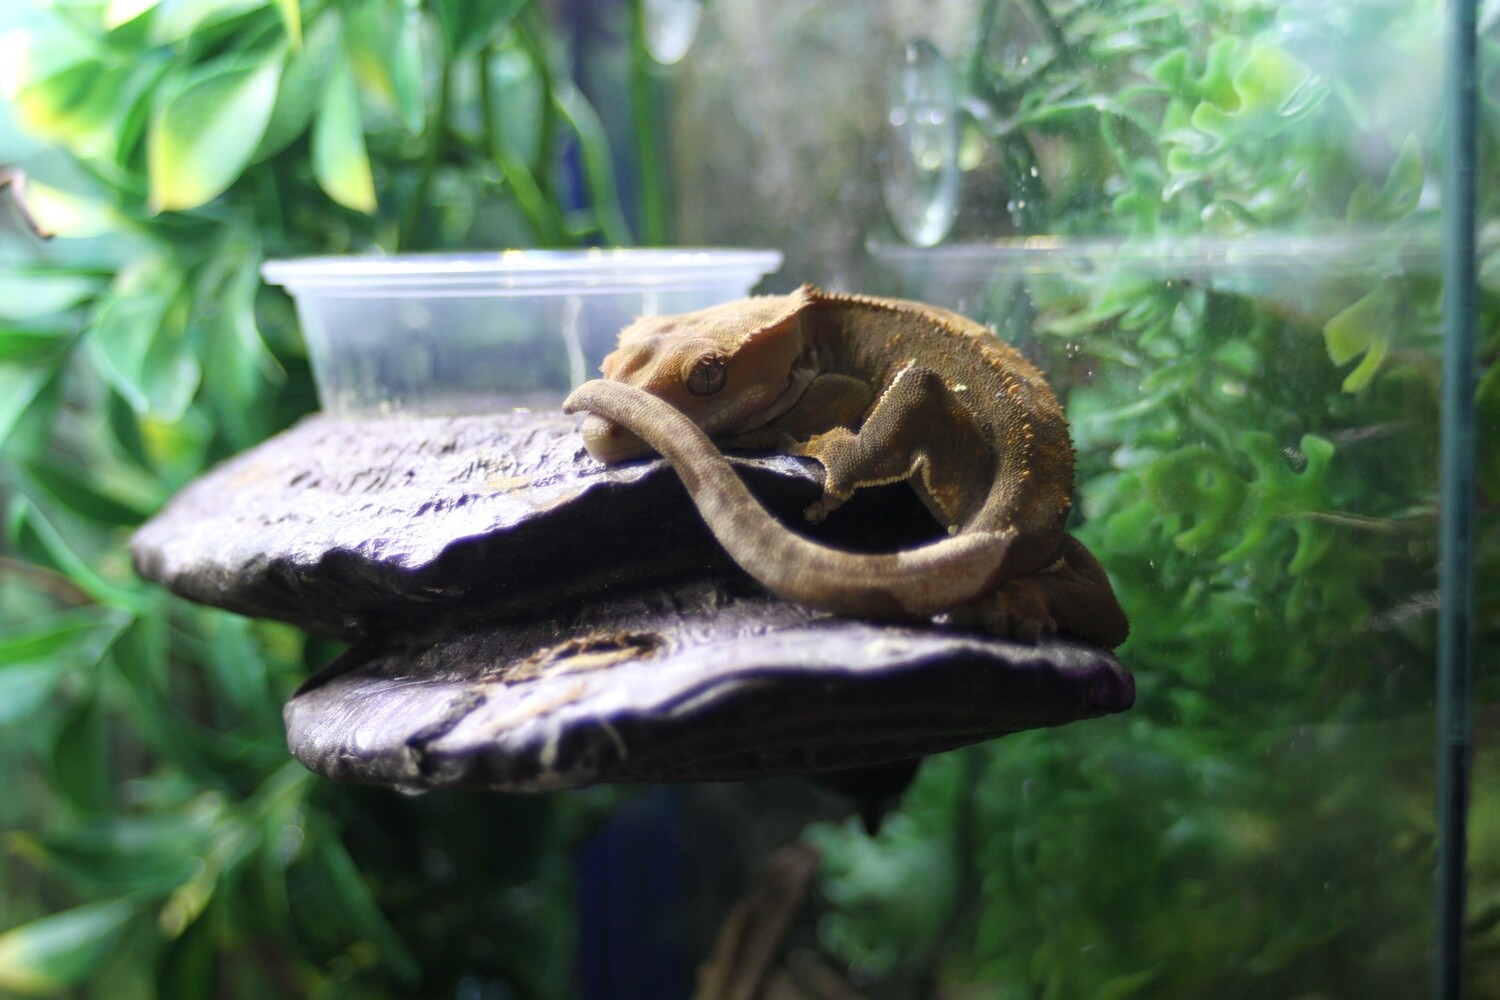 Crested Gecko - Fancy